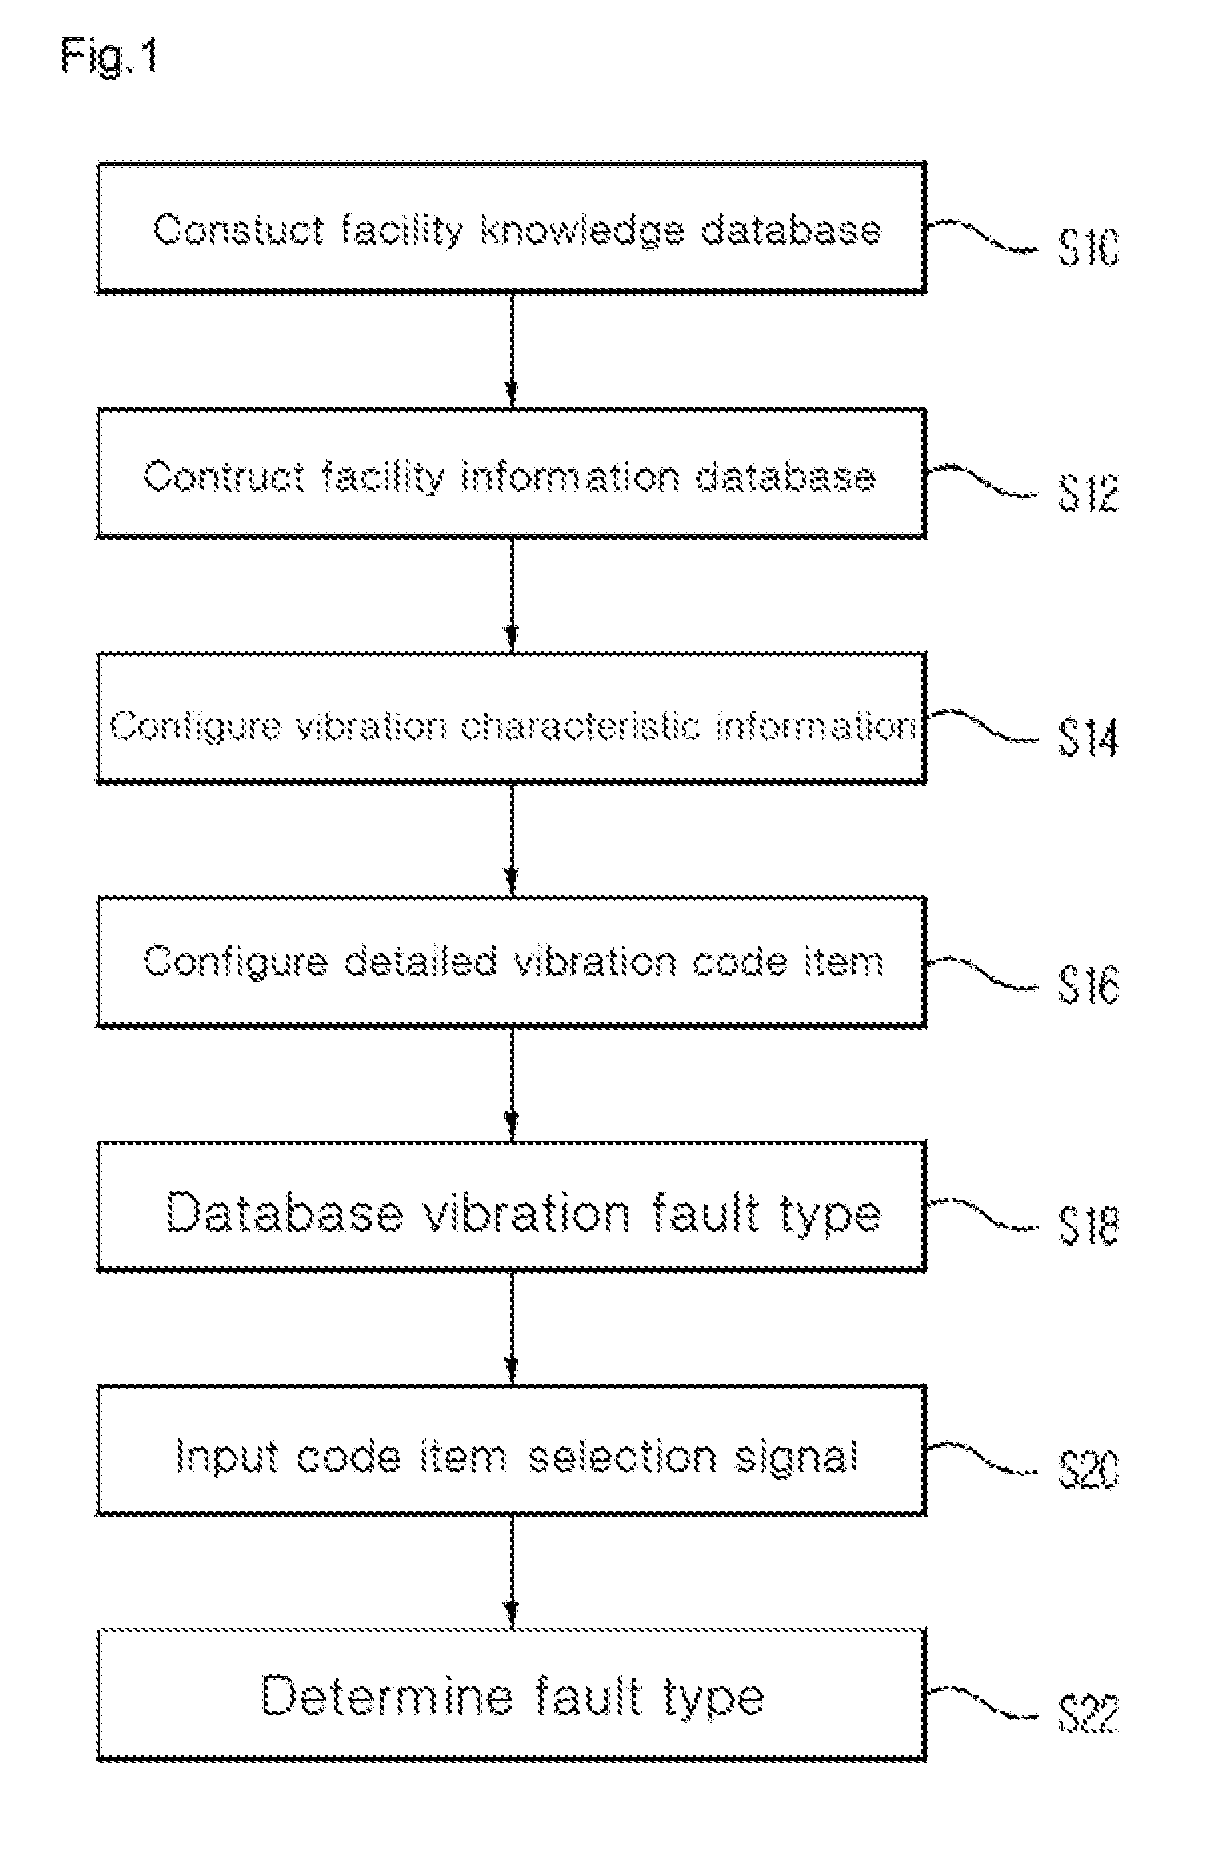 Method for diagnosing fault of facilities using vibration characteristic